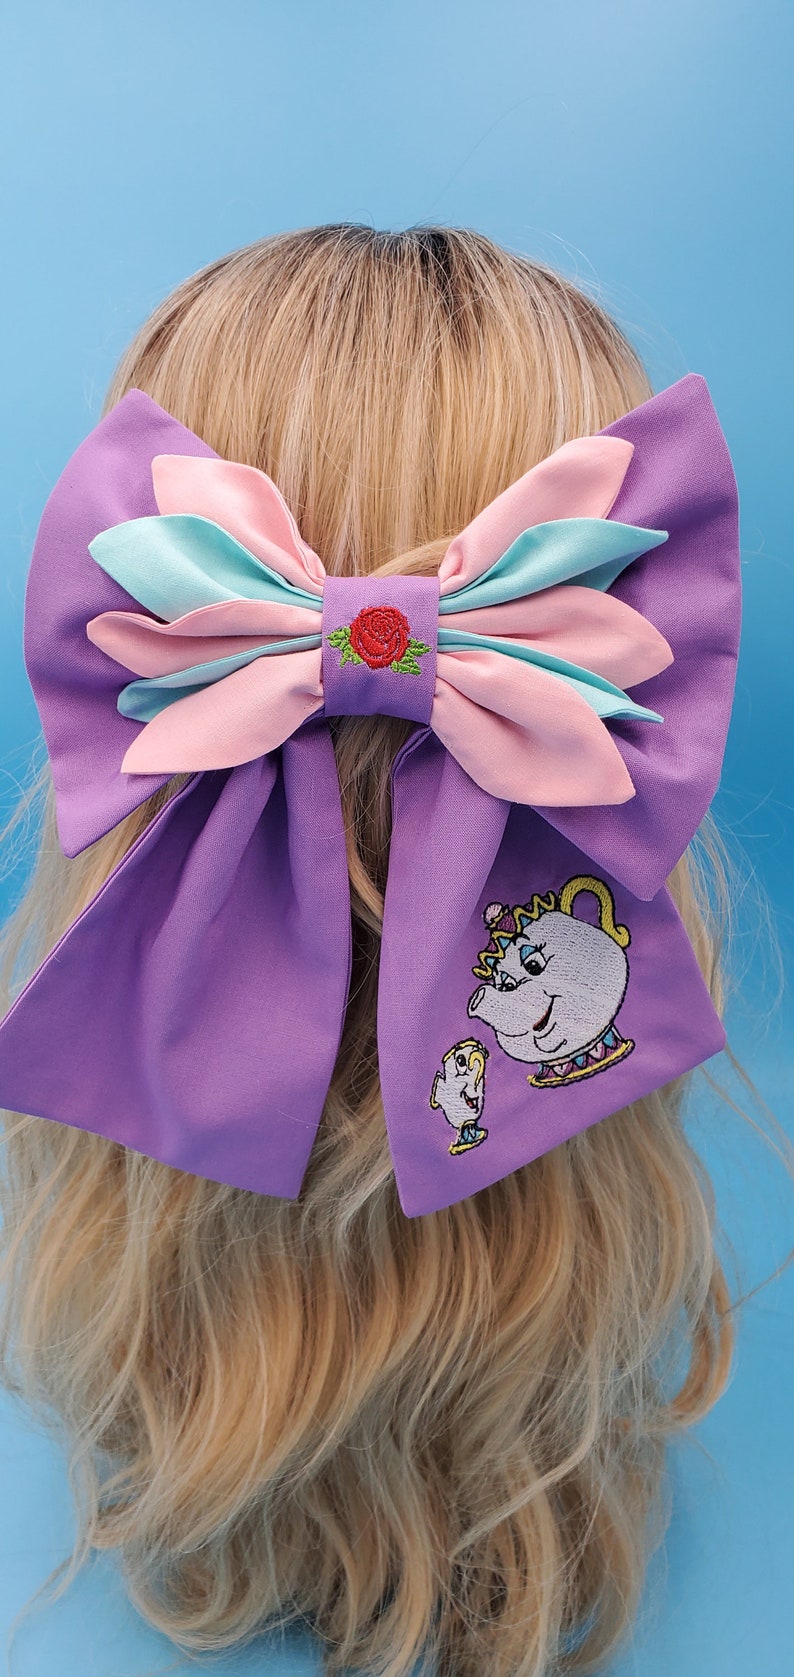 Disney Bound Mrs. Potts and Chip Inspired Beauty and the Beast Vintage Style Bow image 2